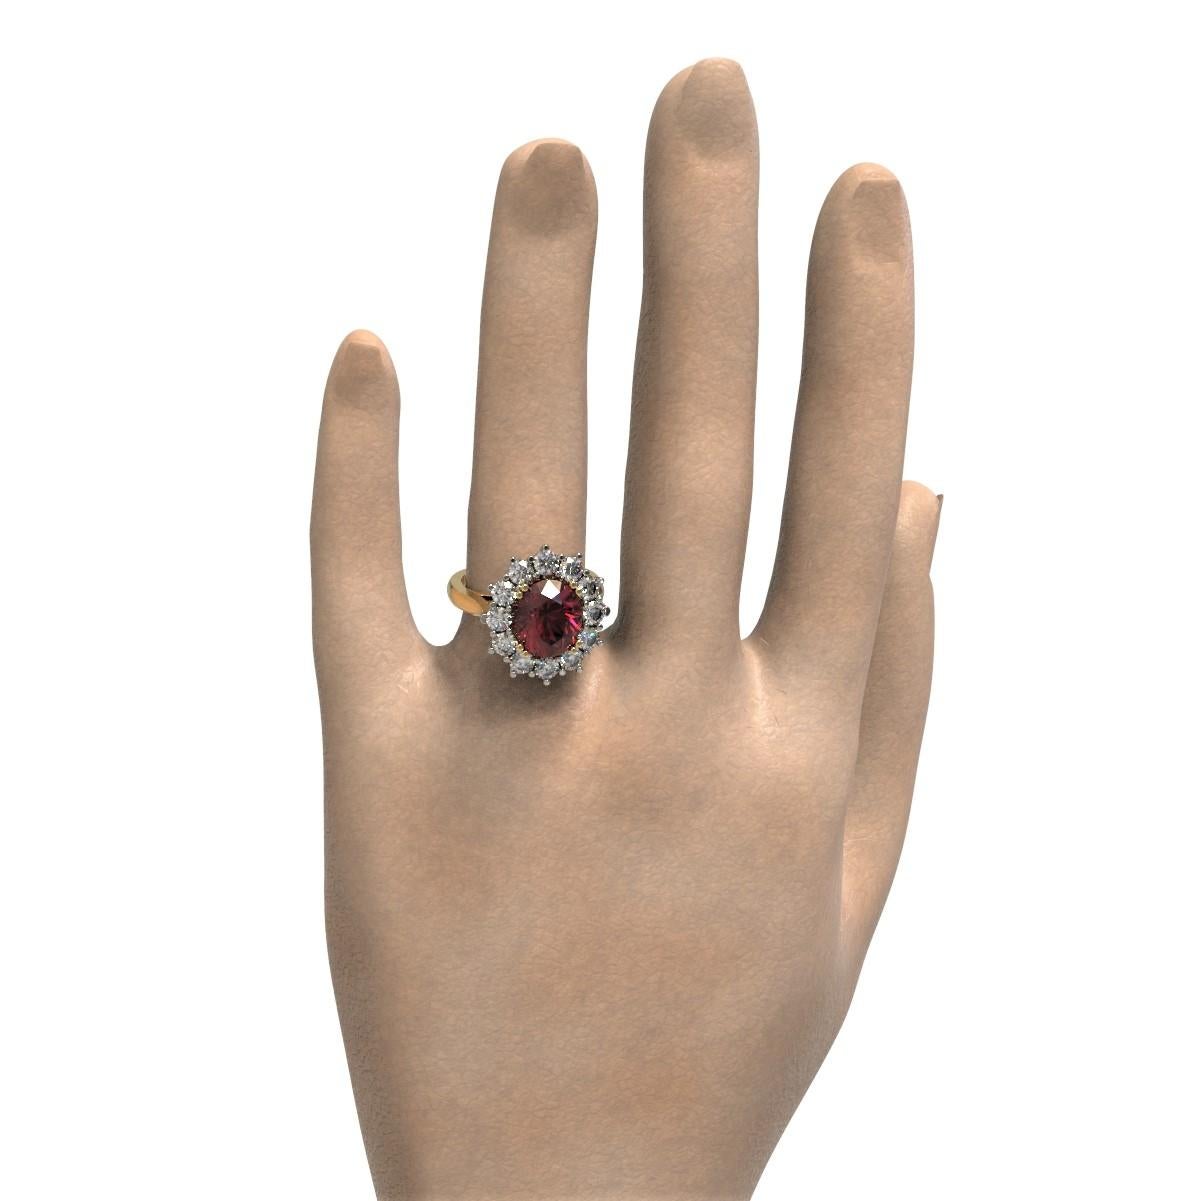 4.32 Carat Oval Rhodolite and Diamonds Cocktail Ring in Platinum & 18 Carat Gold For Sale 3